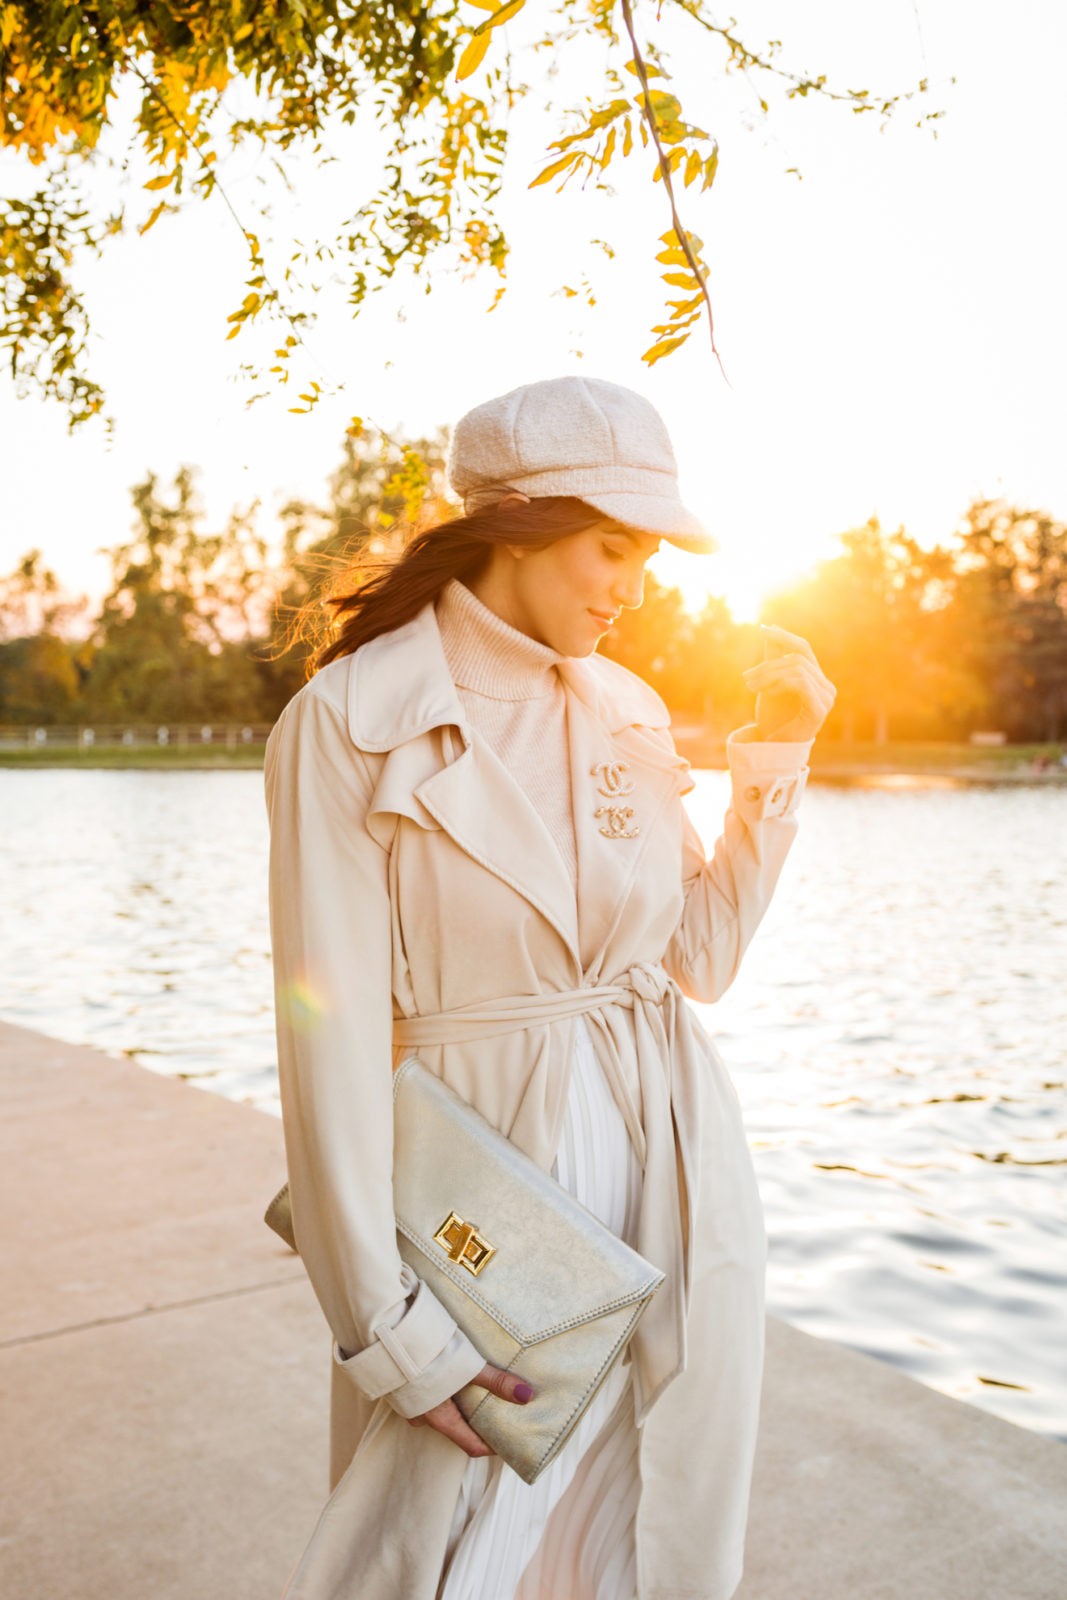 How to Look Expensive by Fashion Blogger Laura Lily, Jimmy Choo Pearl Sacora Heels, Revolve cream wrap coat,